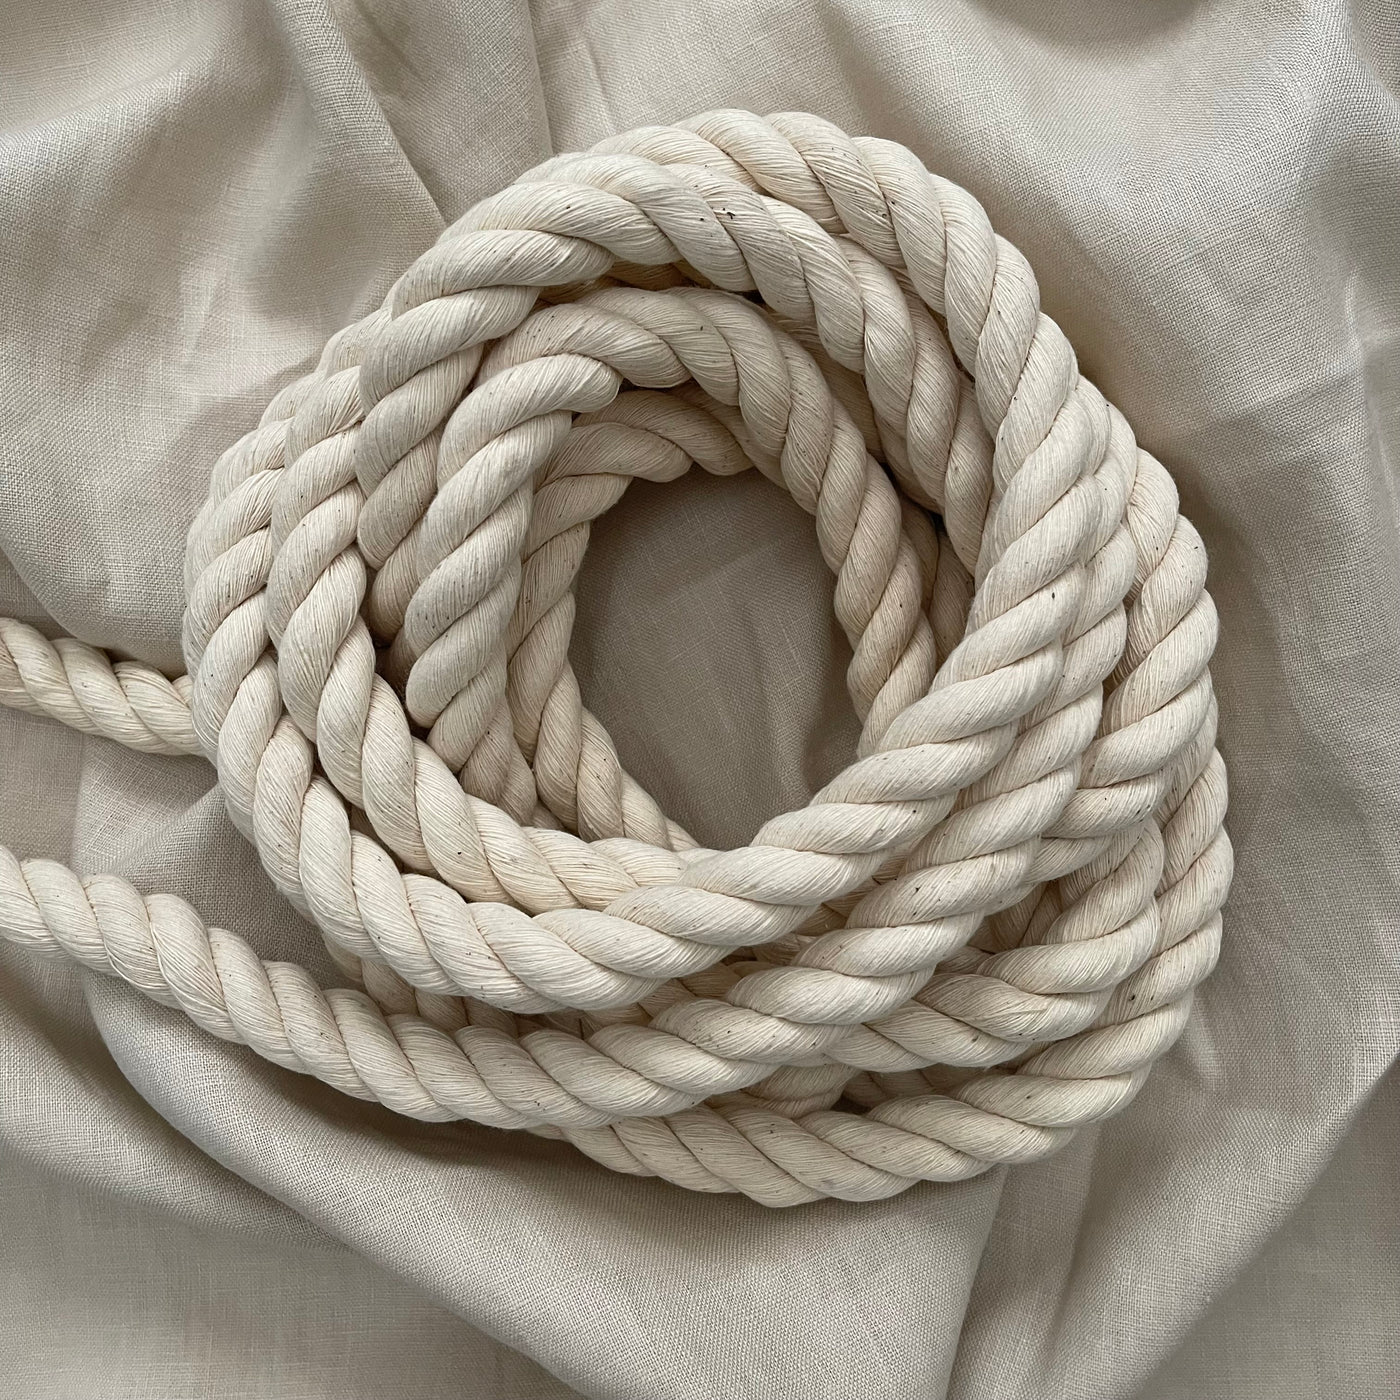 Macrame 3ply Cotton Rope in Natural 16mm is an ever popular and essential item for every fibre lovers tool kit!  Use them for fibre rainbows or separate to use individually for your creations.  Comb these beauties out to create spectacular fringes or tassels!   